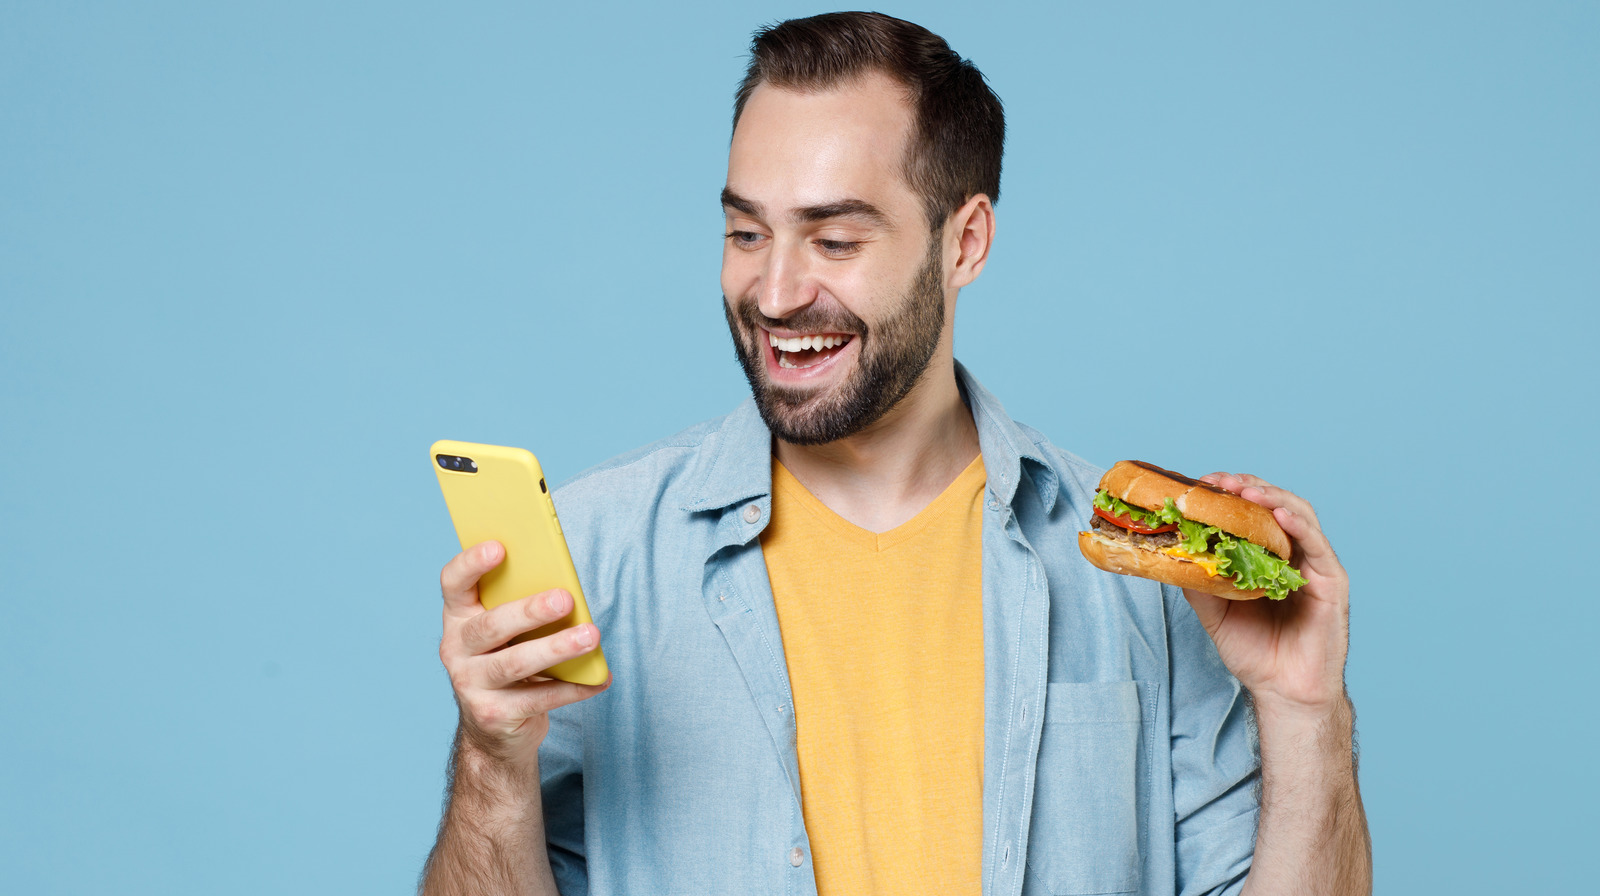 Reddit Thinks These Fast-Food Apps Have The Best Deals